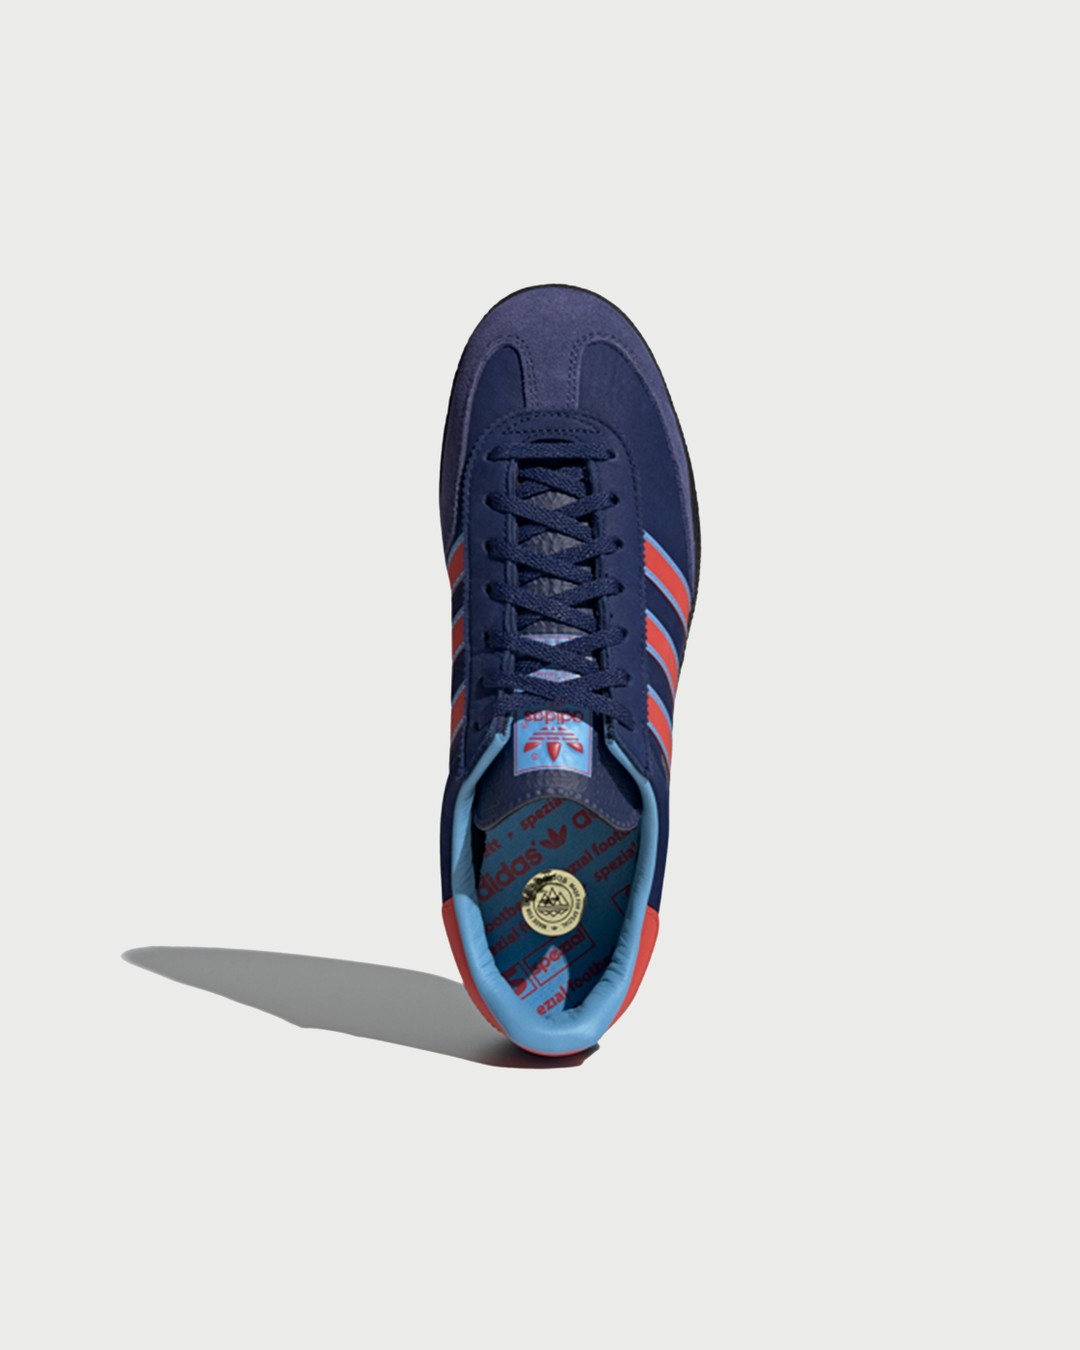 Adidas – Spezial Manchester 89 Trainer Navy - Low Top Sneakers - Blue - Image 5